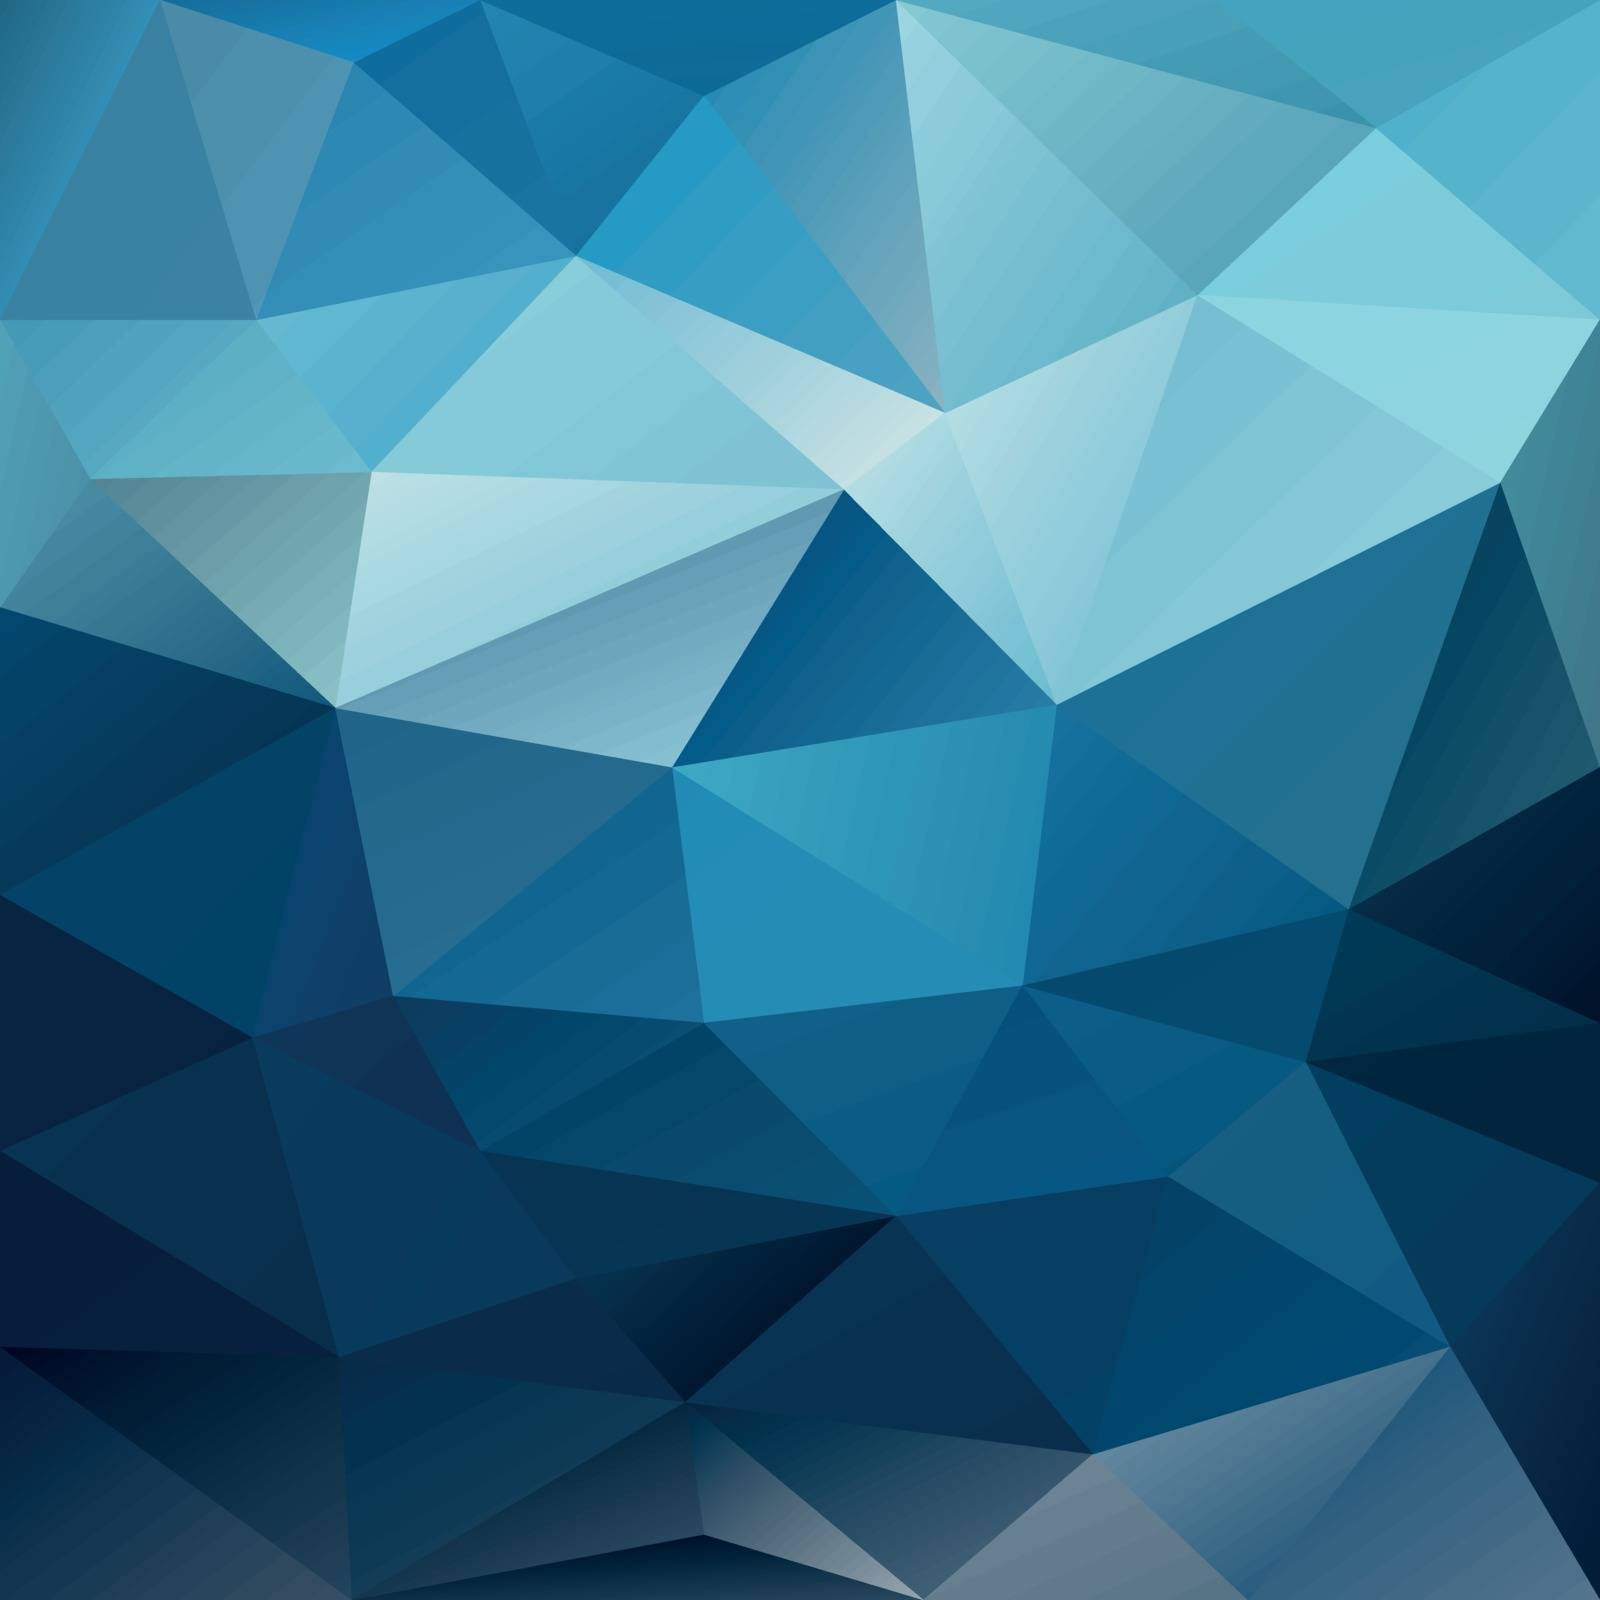 vector background with irregular tessellations pattern - triangular design in blue night sky colors